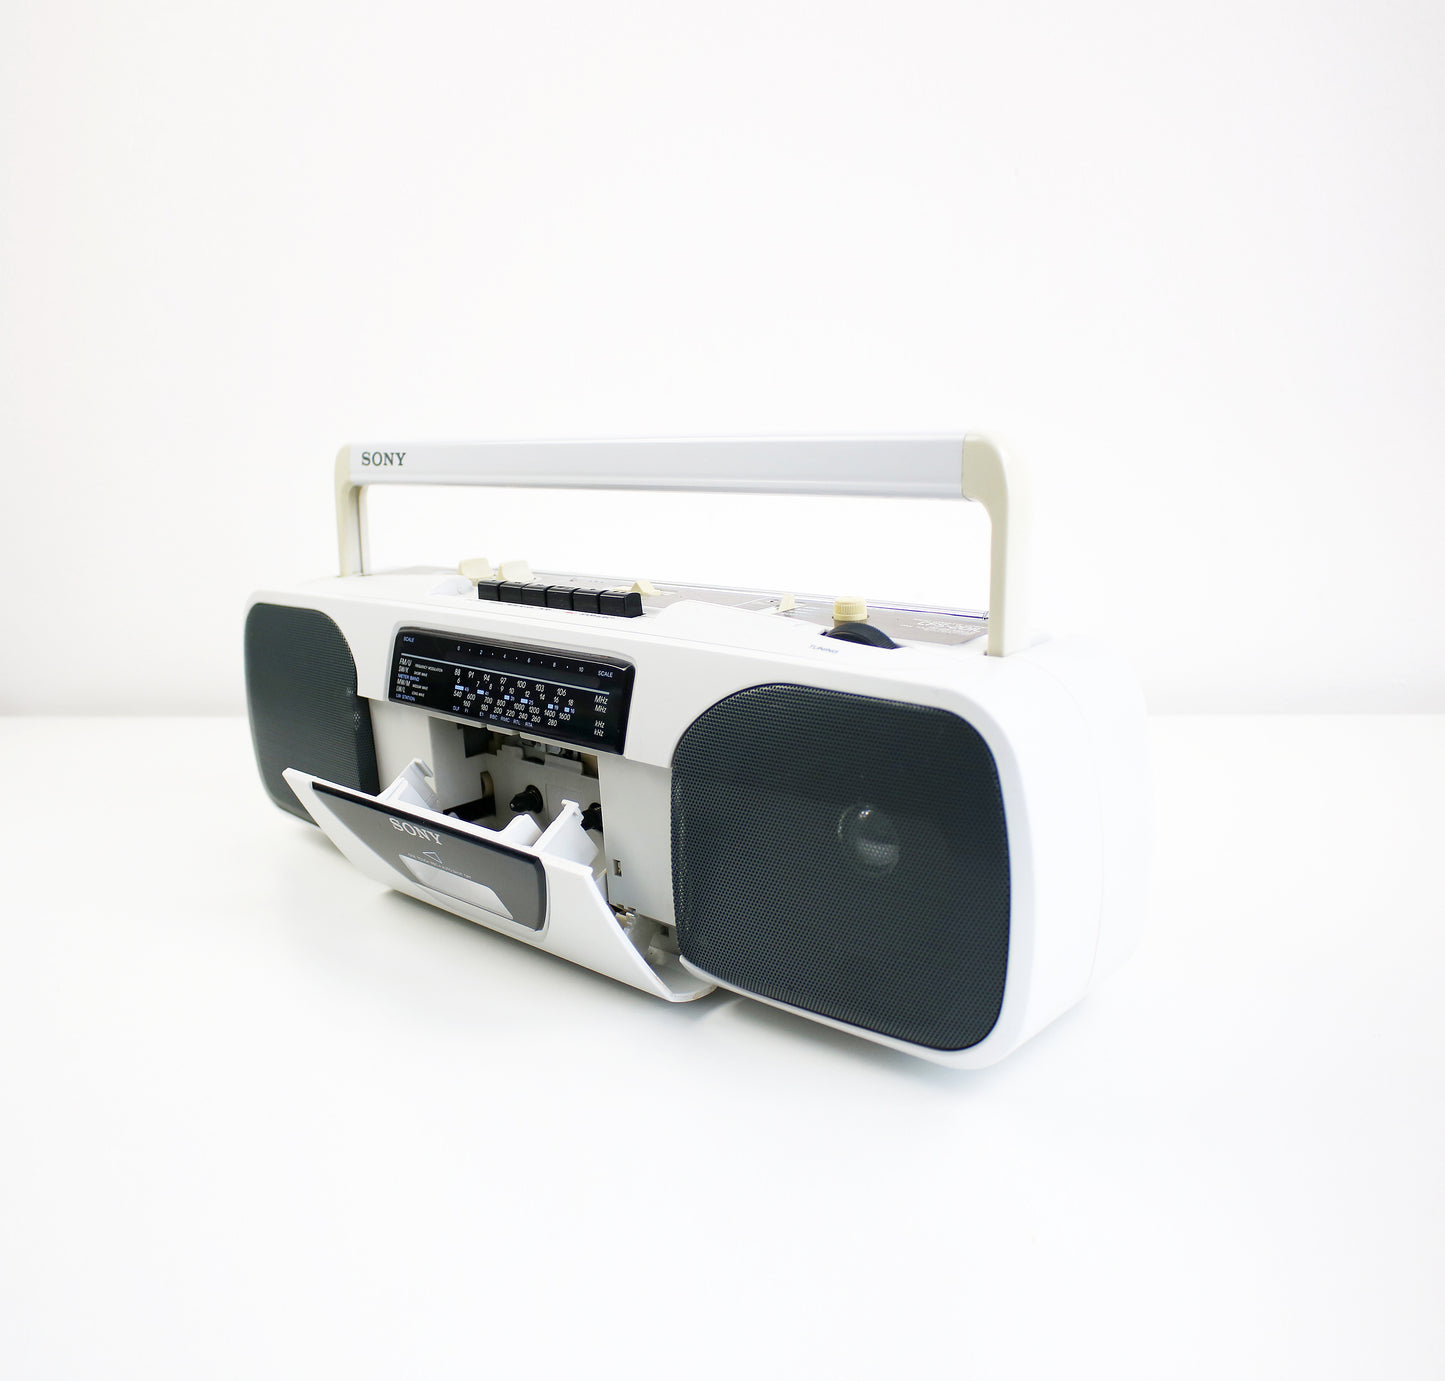 Space age 1989 Sony boombox - radio cassette in  pearl white